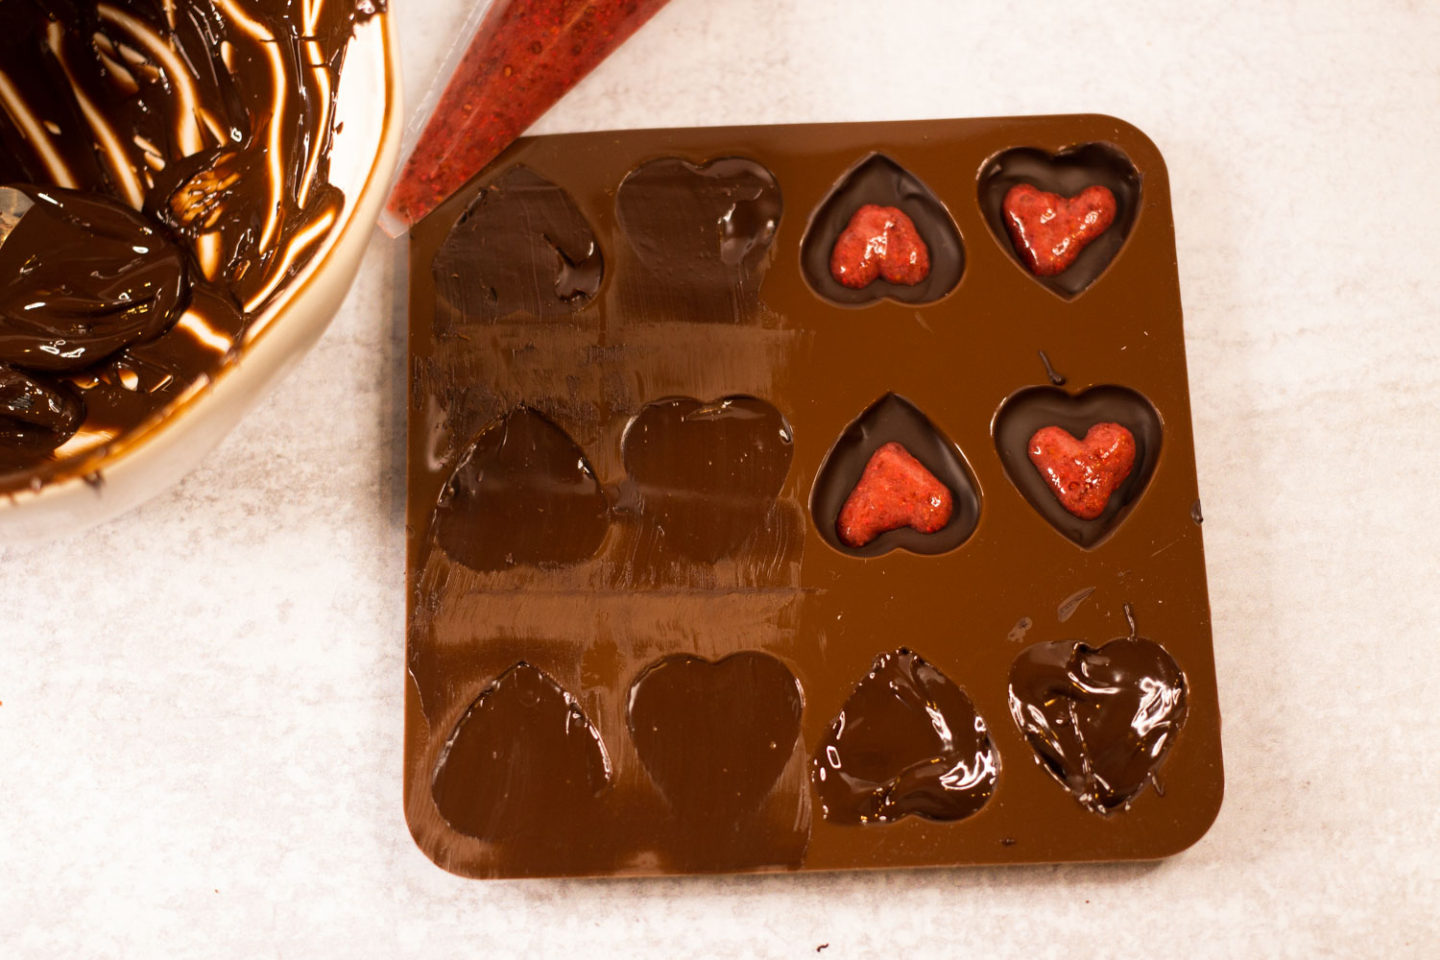 Heart shaped chocolate mold, some with strawberry filling and some completely finished and smoothed over